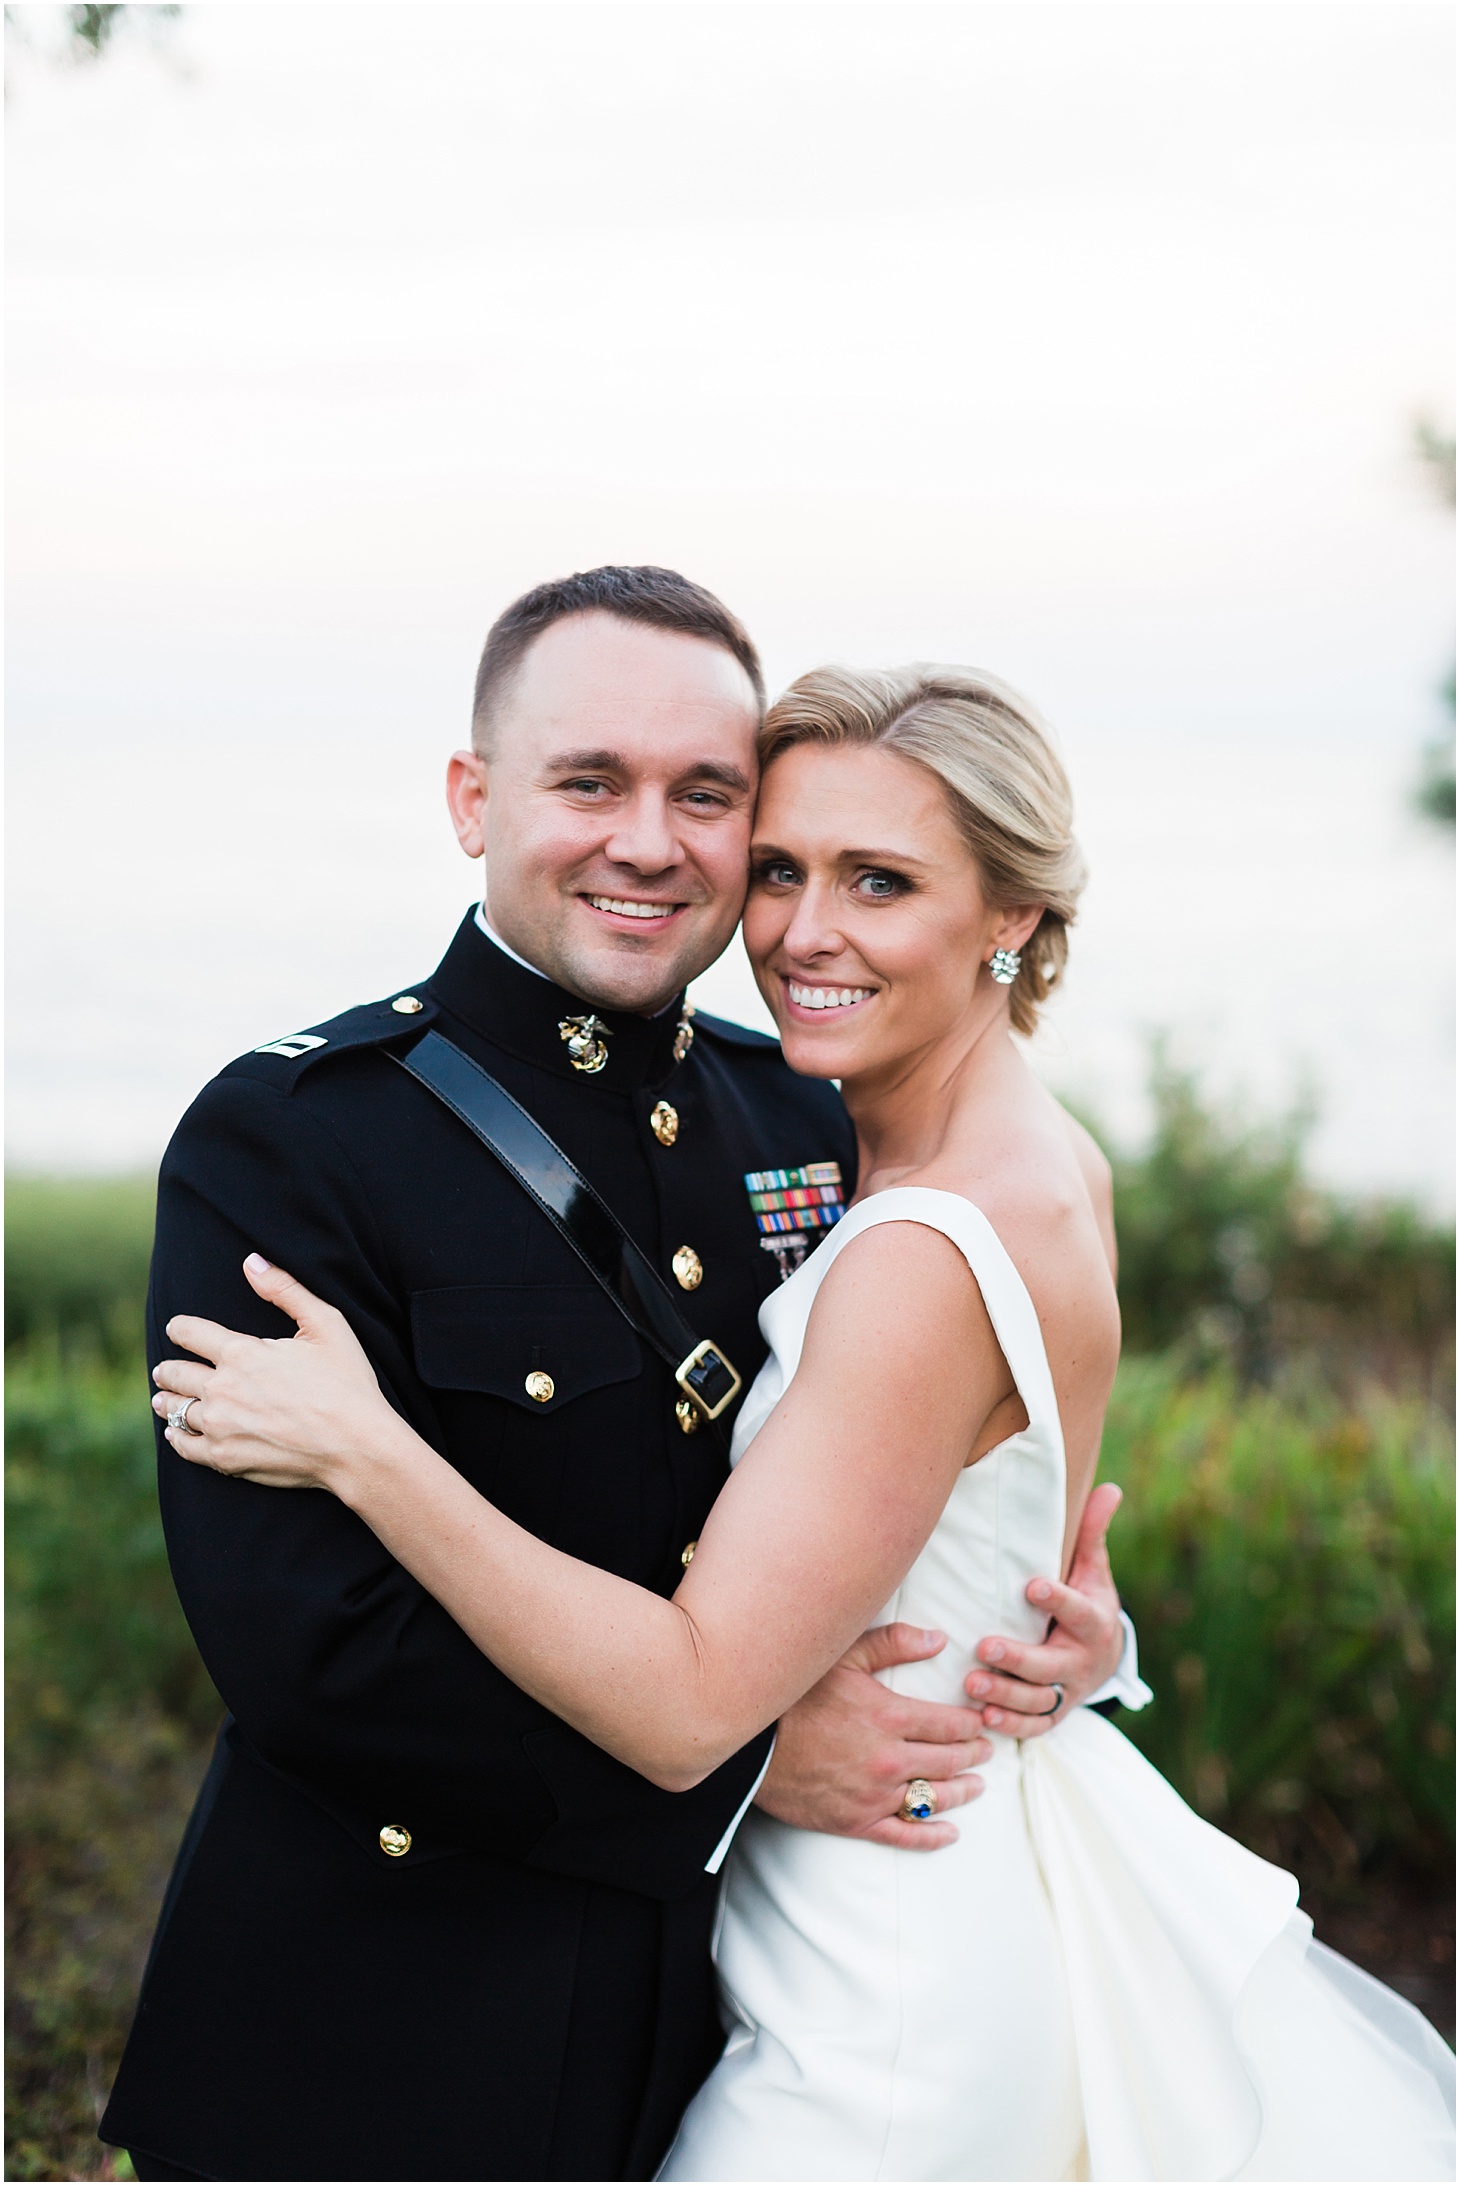 Wedding Portraits at Gibson Island Club in Annapolis, MD | Southern Magnolia Wedding at the Naval Academy and Gibson Island Club | Sarah Bradshaw Photography